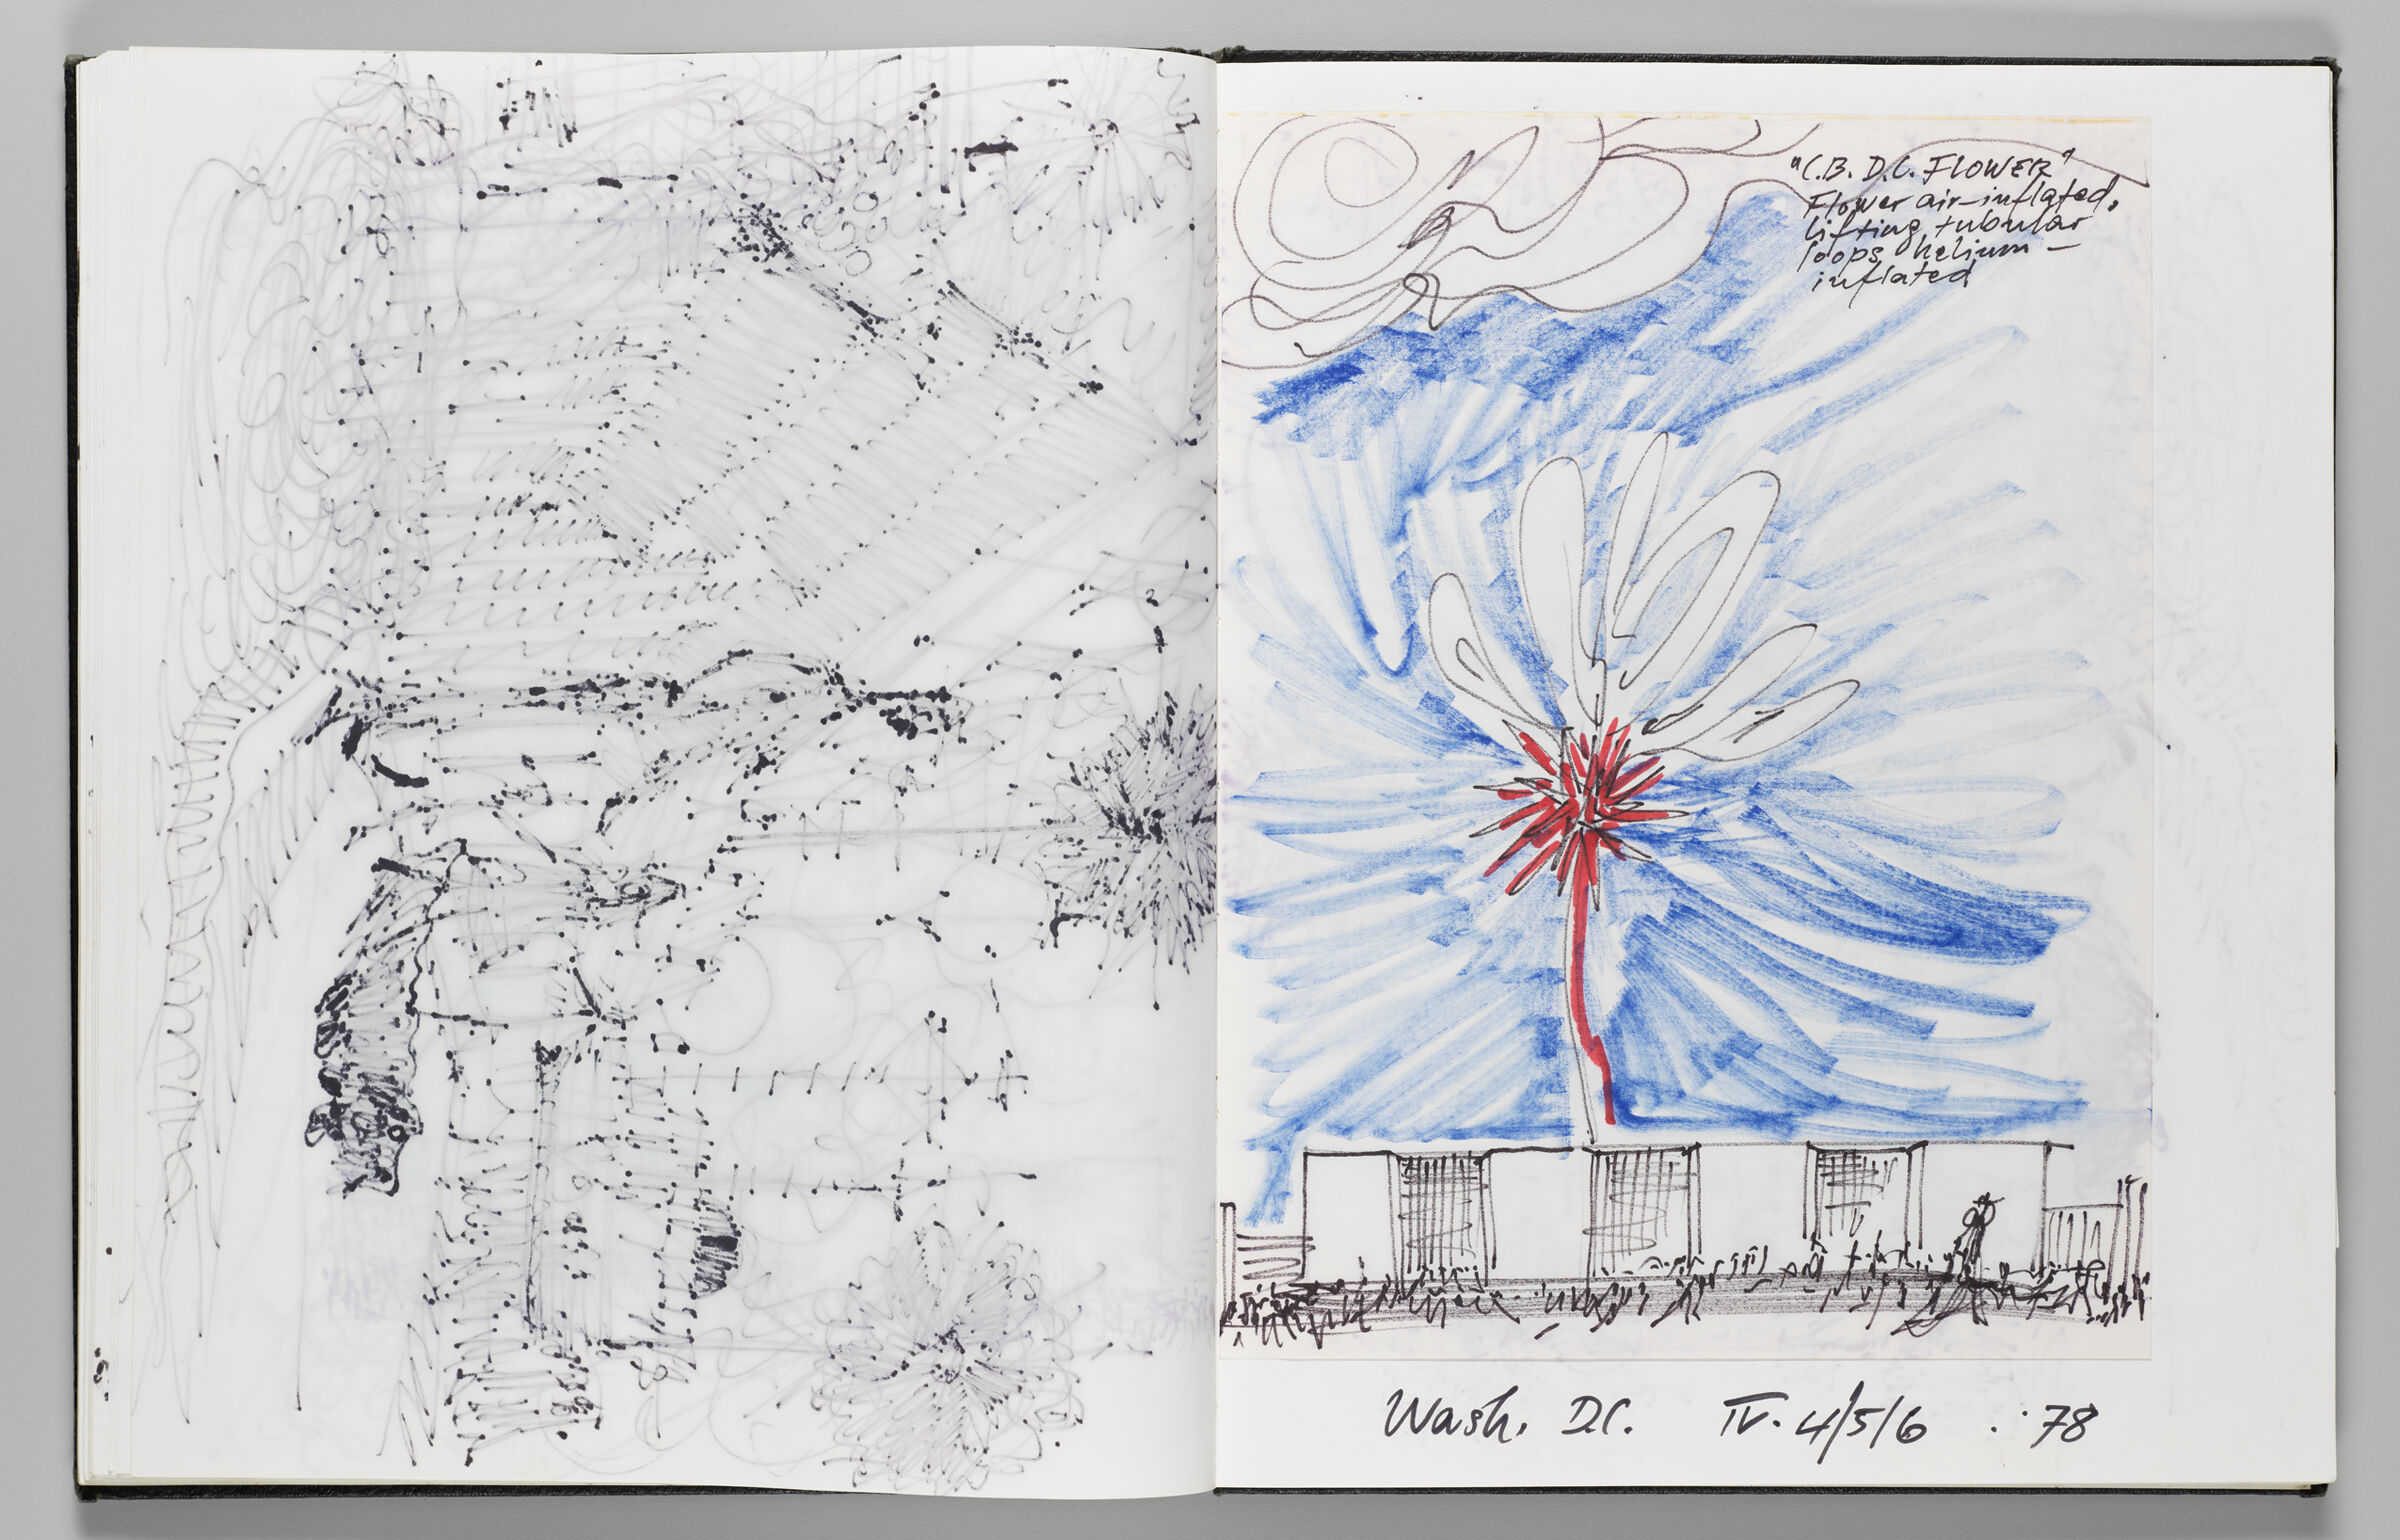 Untitled (Bleed-Through Of Previous Page And Color Transfer, Left Page); Untitled (Pasted-In Sky Art Sketch And Notes, Right Page)